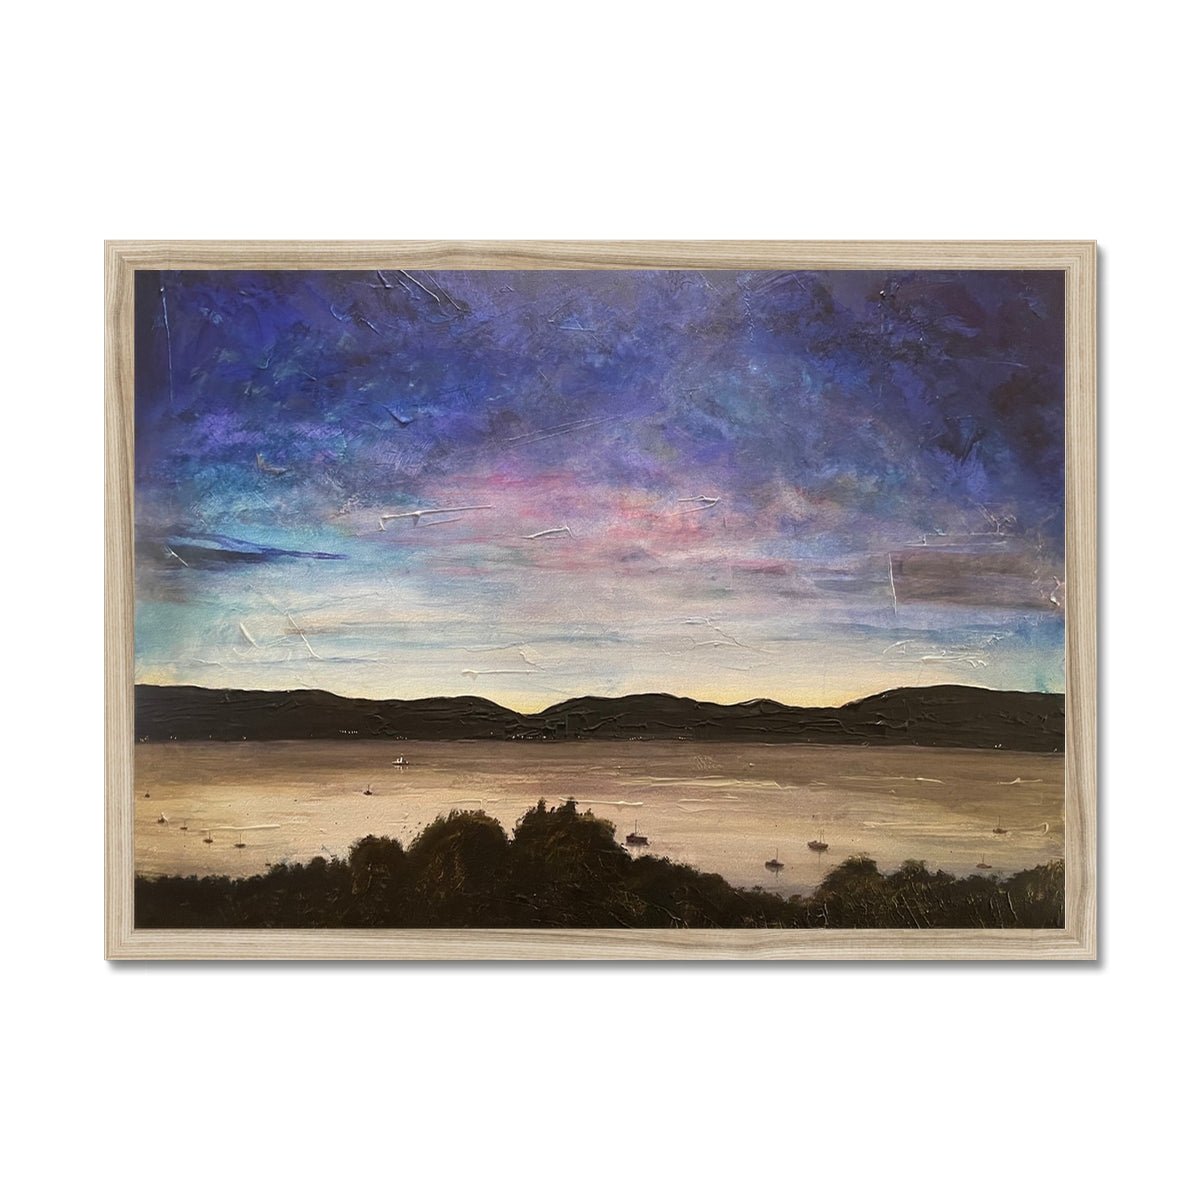 River Clyde Twilight Painting | Framed Prints From Scotland-Framed Prints-River Clyde Art Gallery-A2 Landscape-Natural Frame-Paintings, Prints, Homeware, Art Gifts From Scotland By Scottish Artist Kevin Hunter